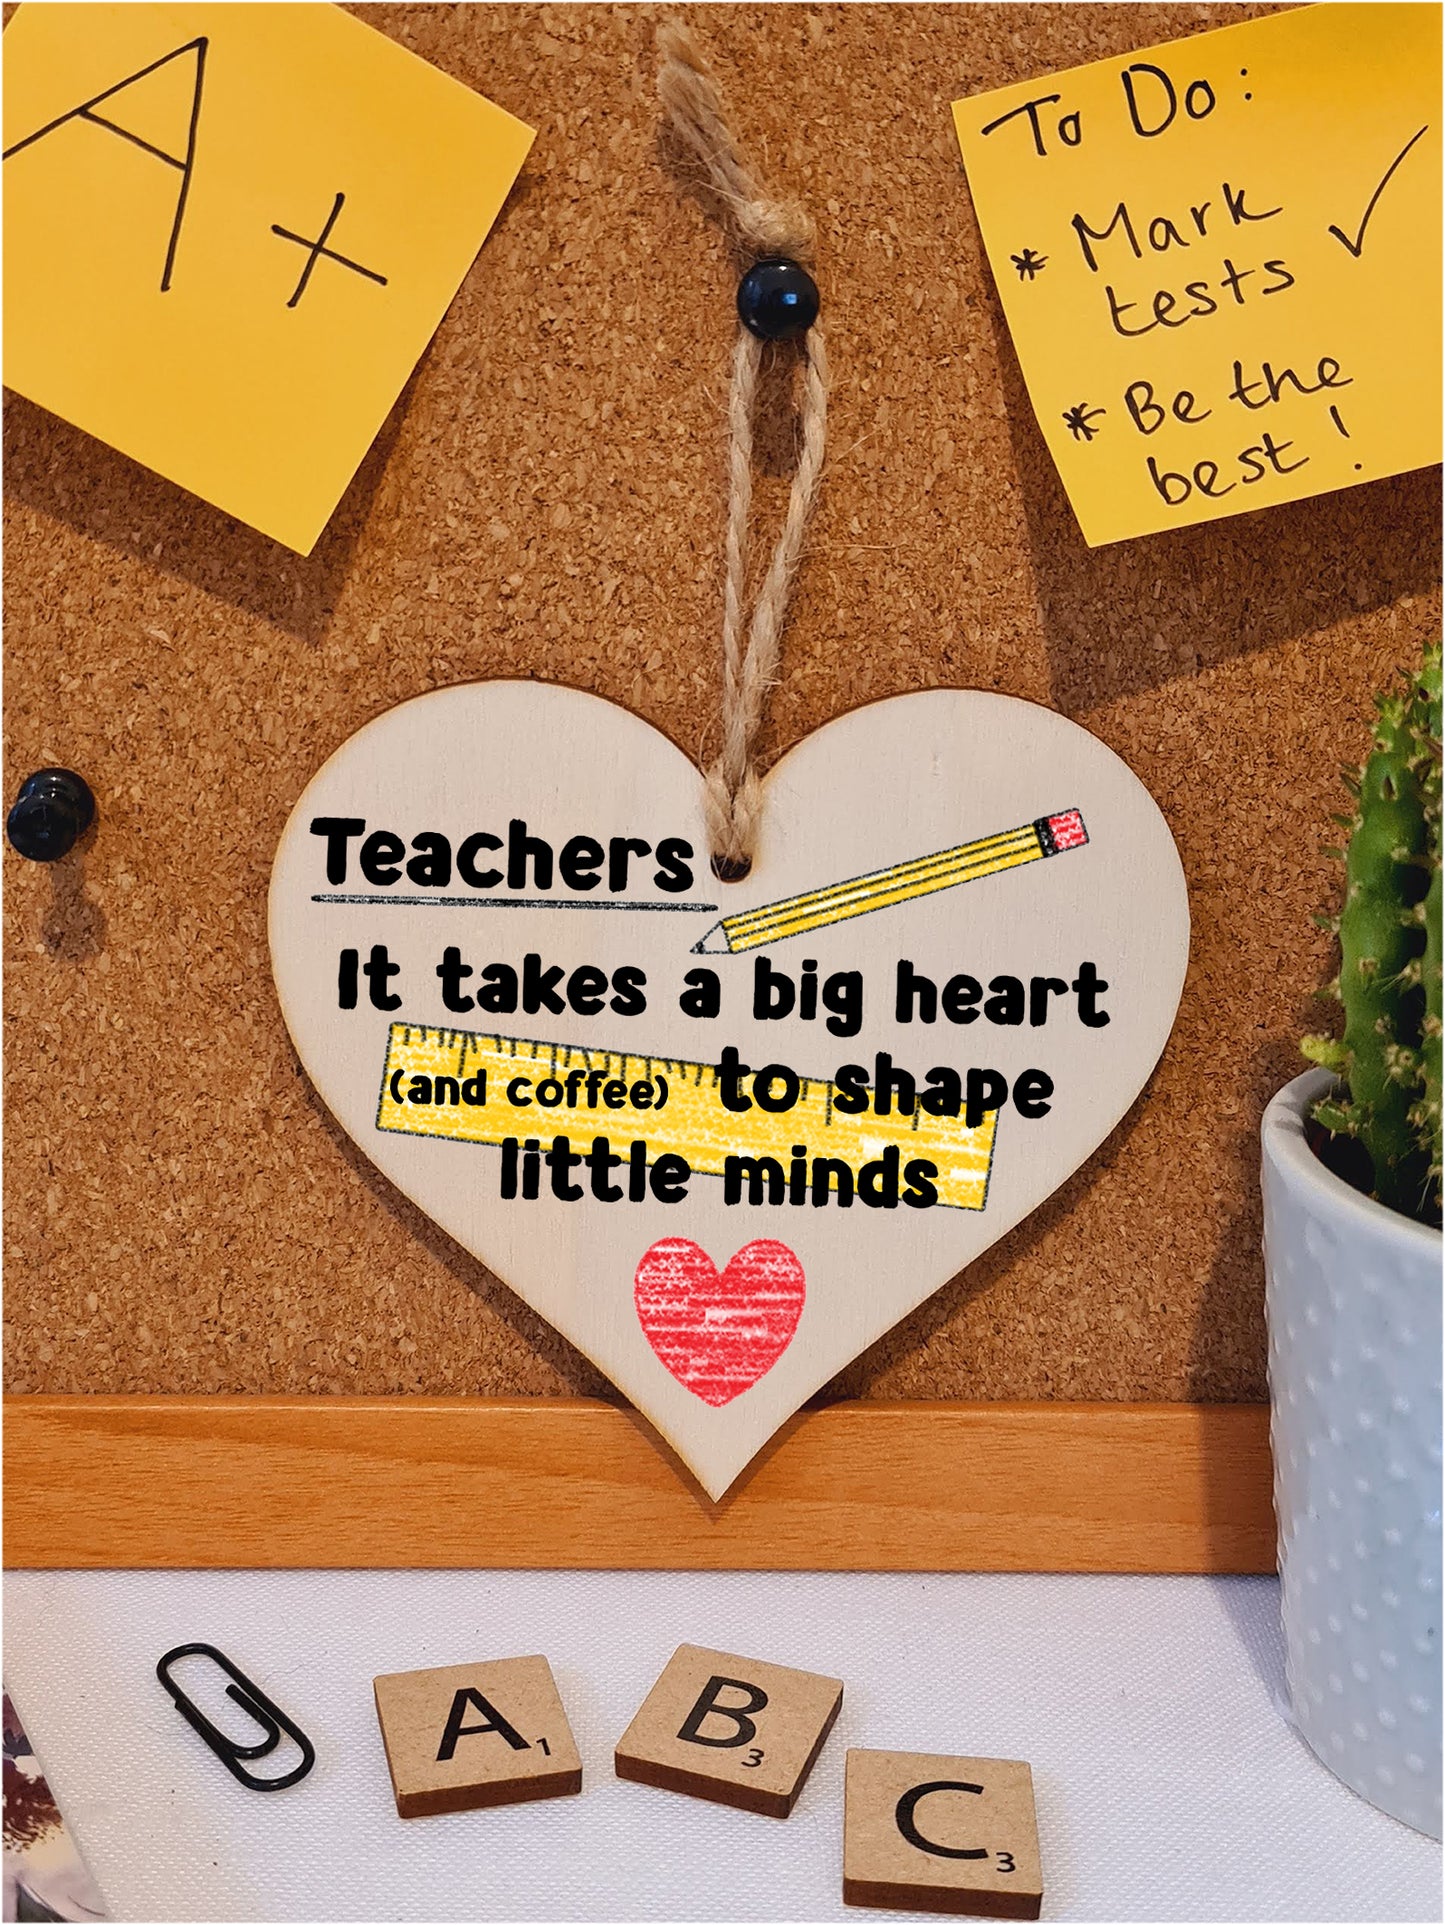 Handmade Wooden Hanging Heart Plaque Gift for a Great Teacher Funny Thank You Keepsake